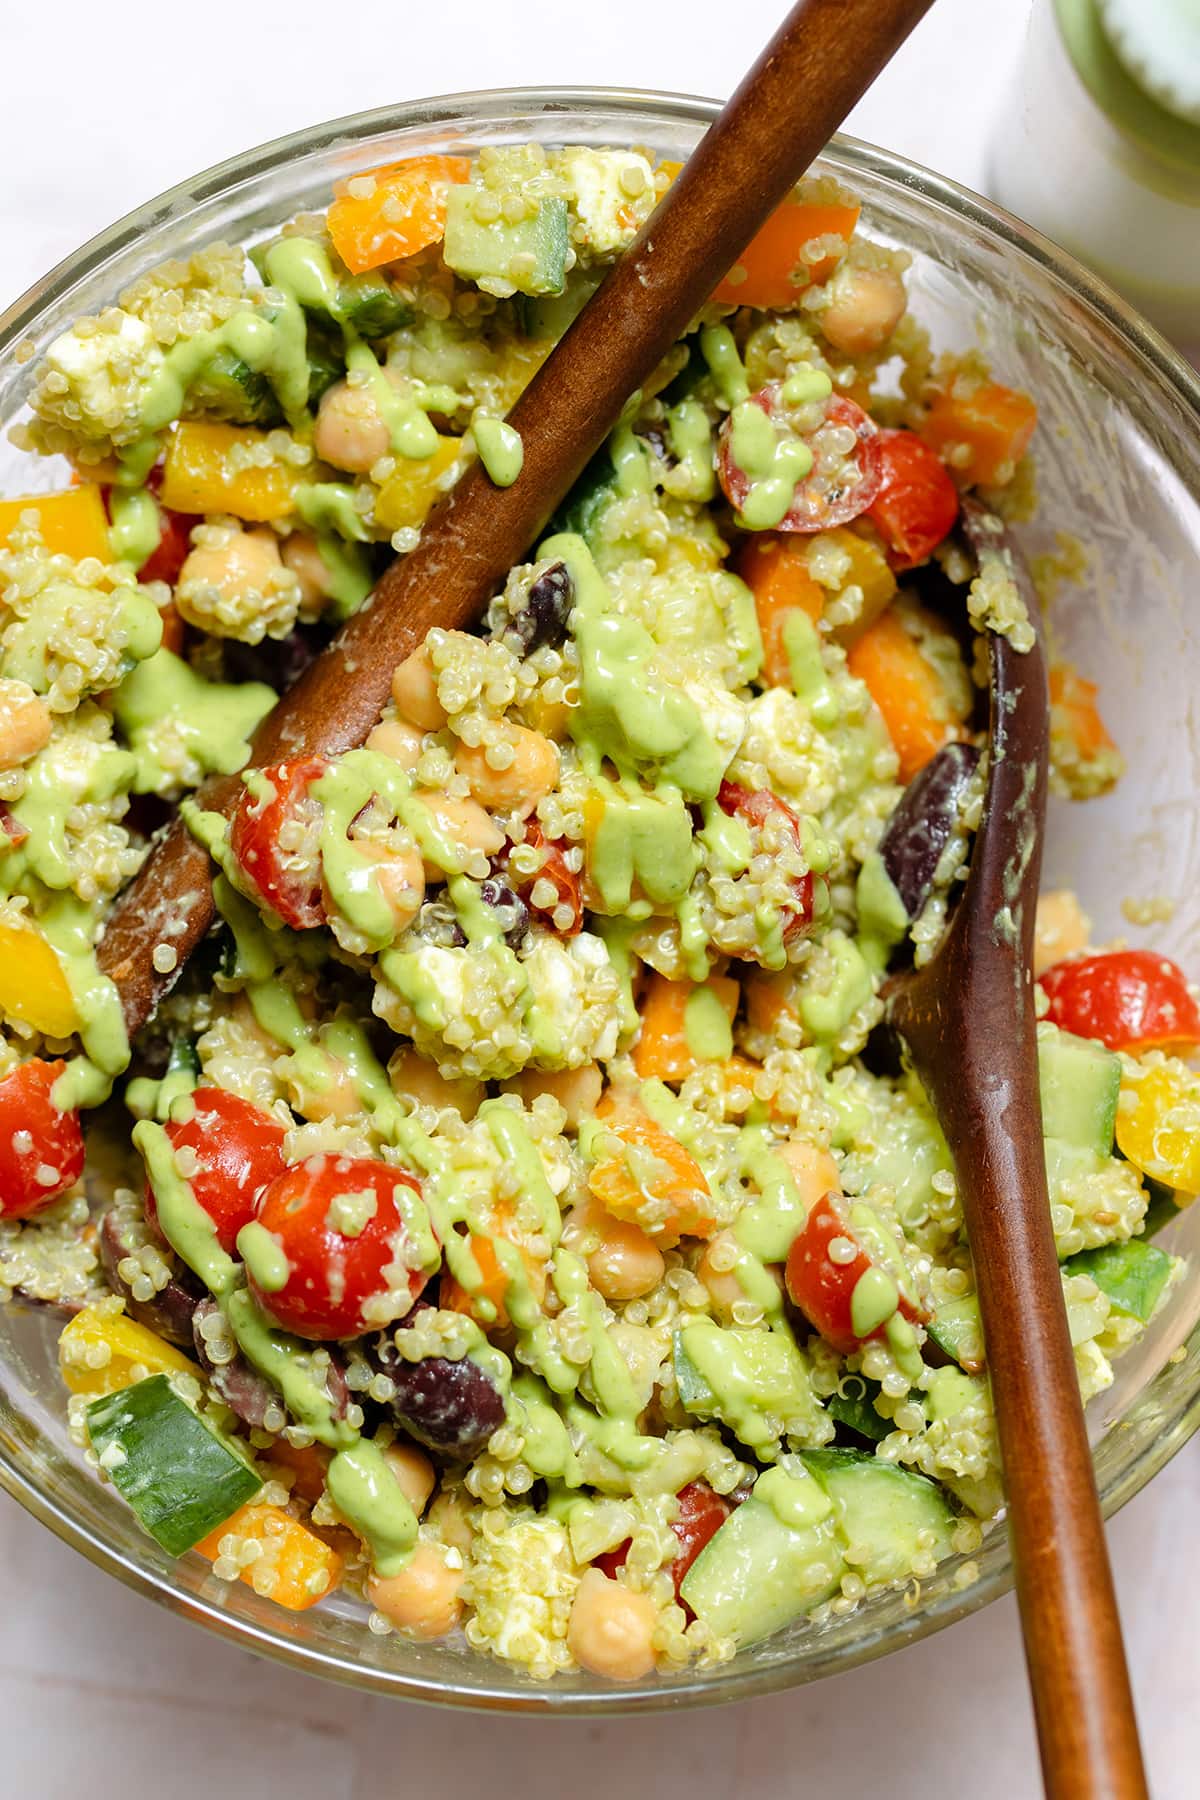 Quinoa chickpea salad with colorful vegetables in a large glass bowl with two wooden spoons.